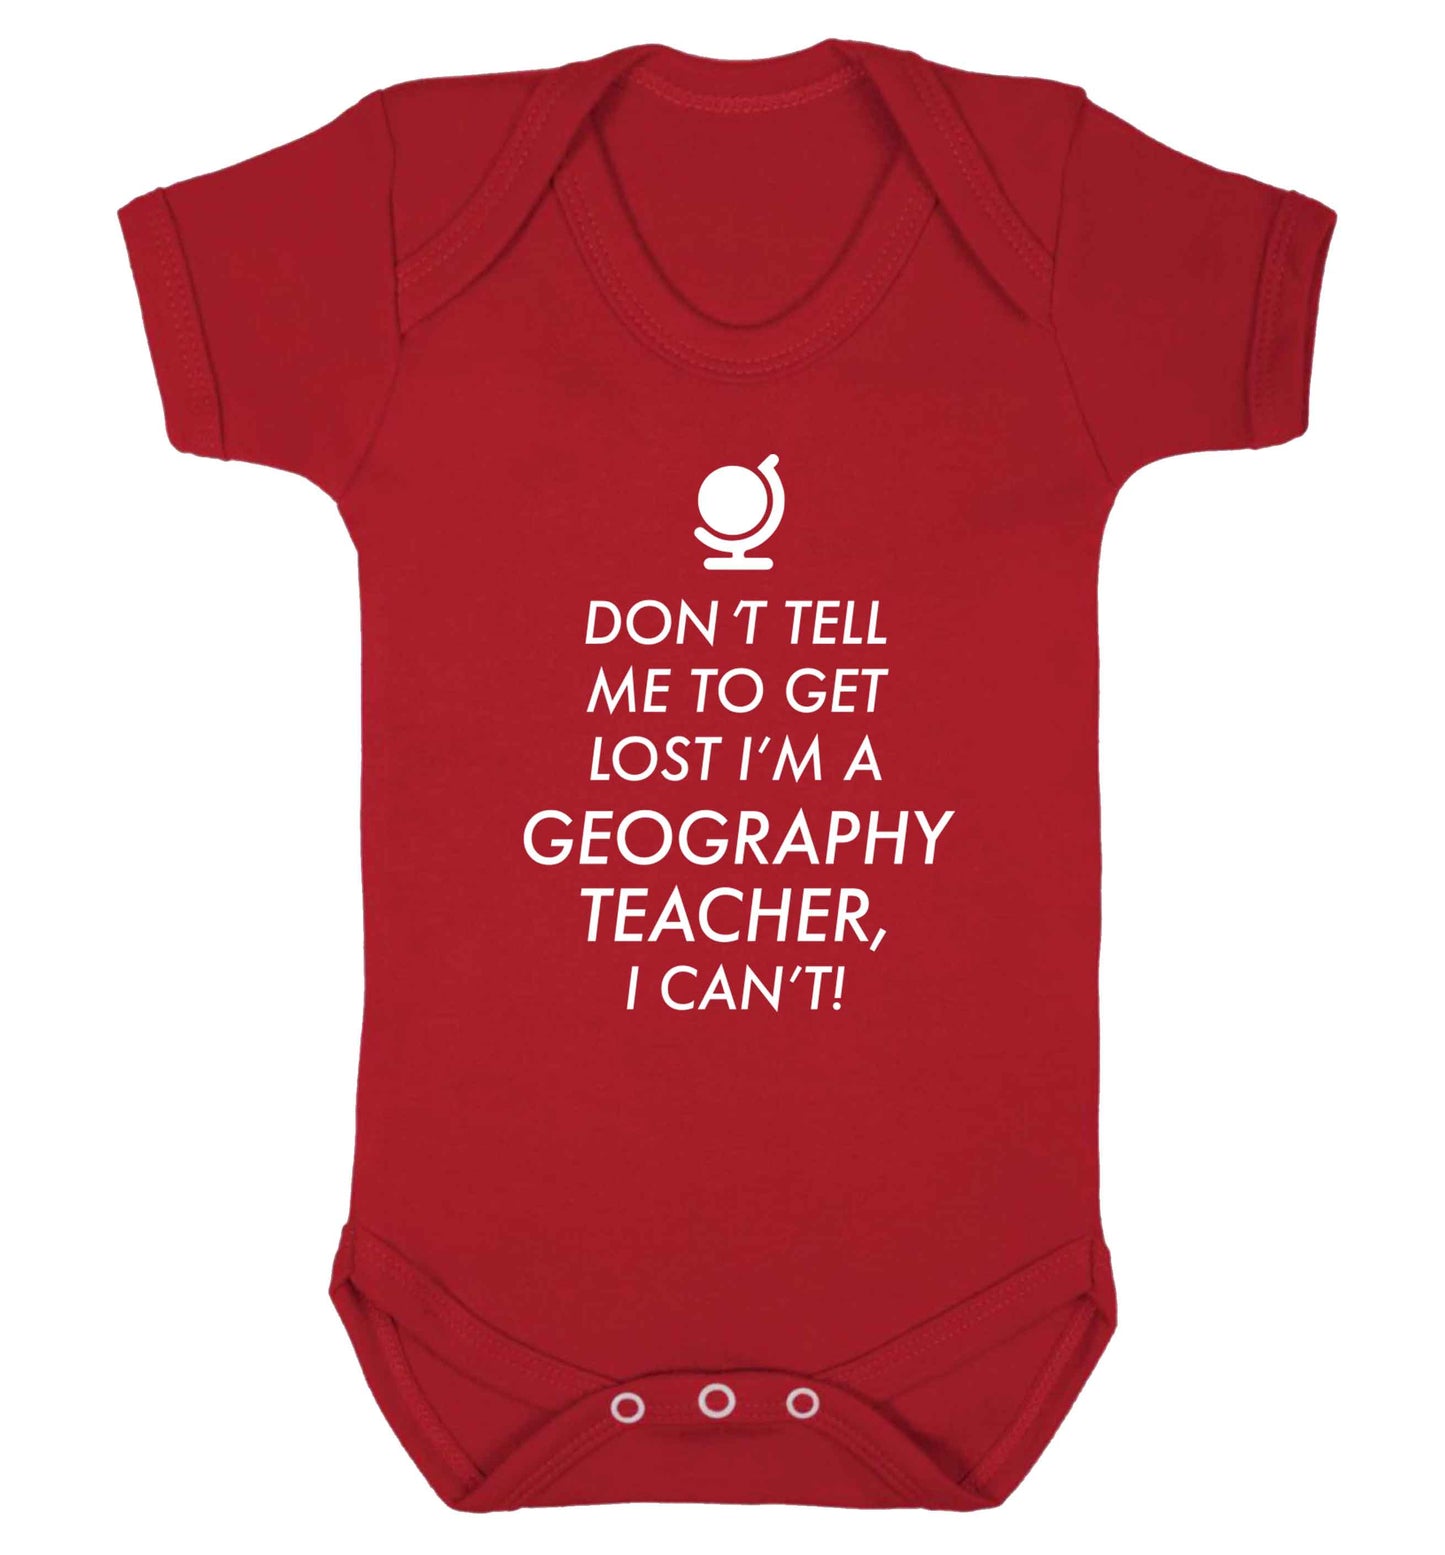 Don't tell me to get lost I'm a geography teacher, I can't Baby Vest red 18-24 months